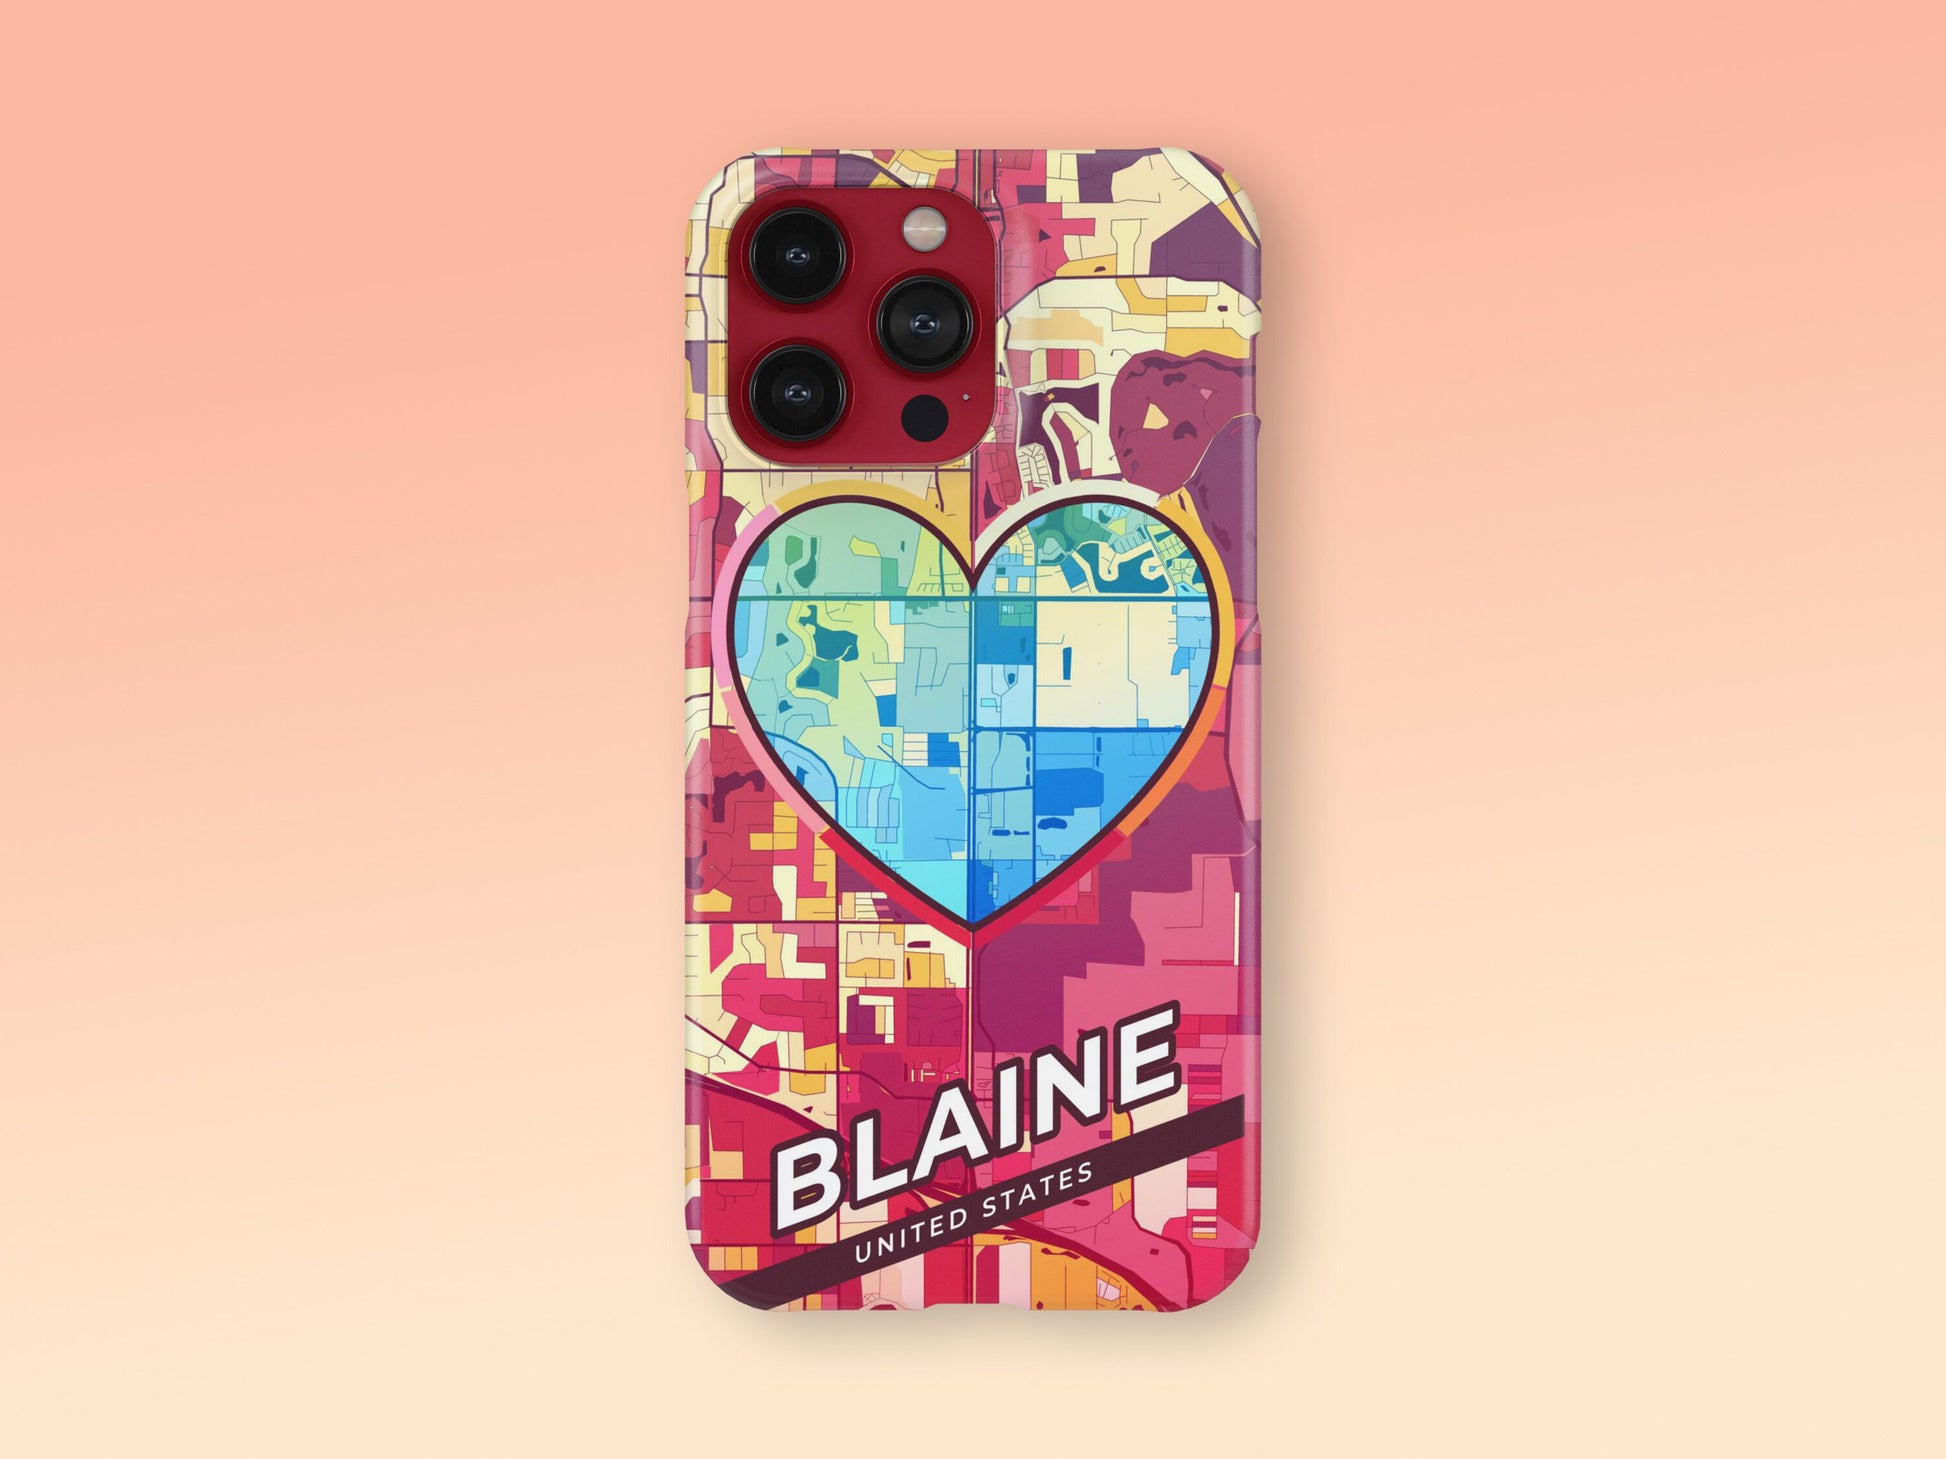 Blaine Minnesota slim phone case with colorful icon. Birthday, wedding or housewarming gift. Couple match cases. 2